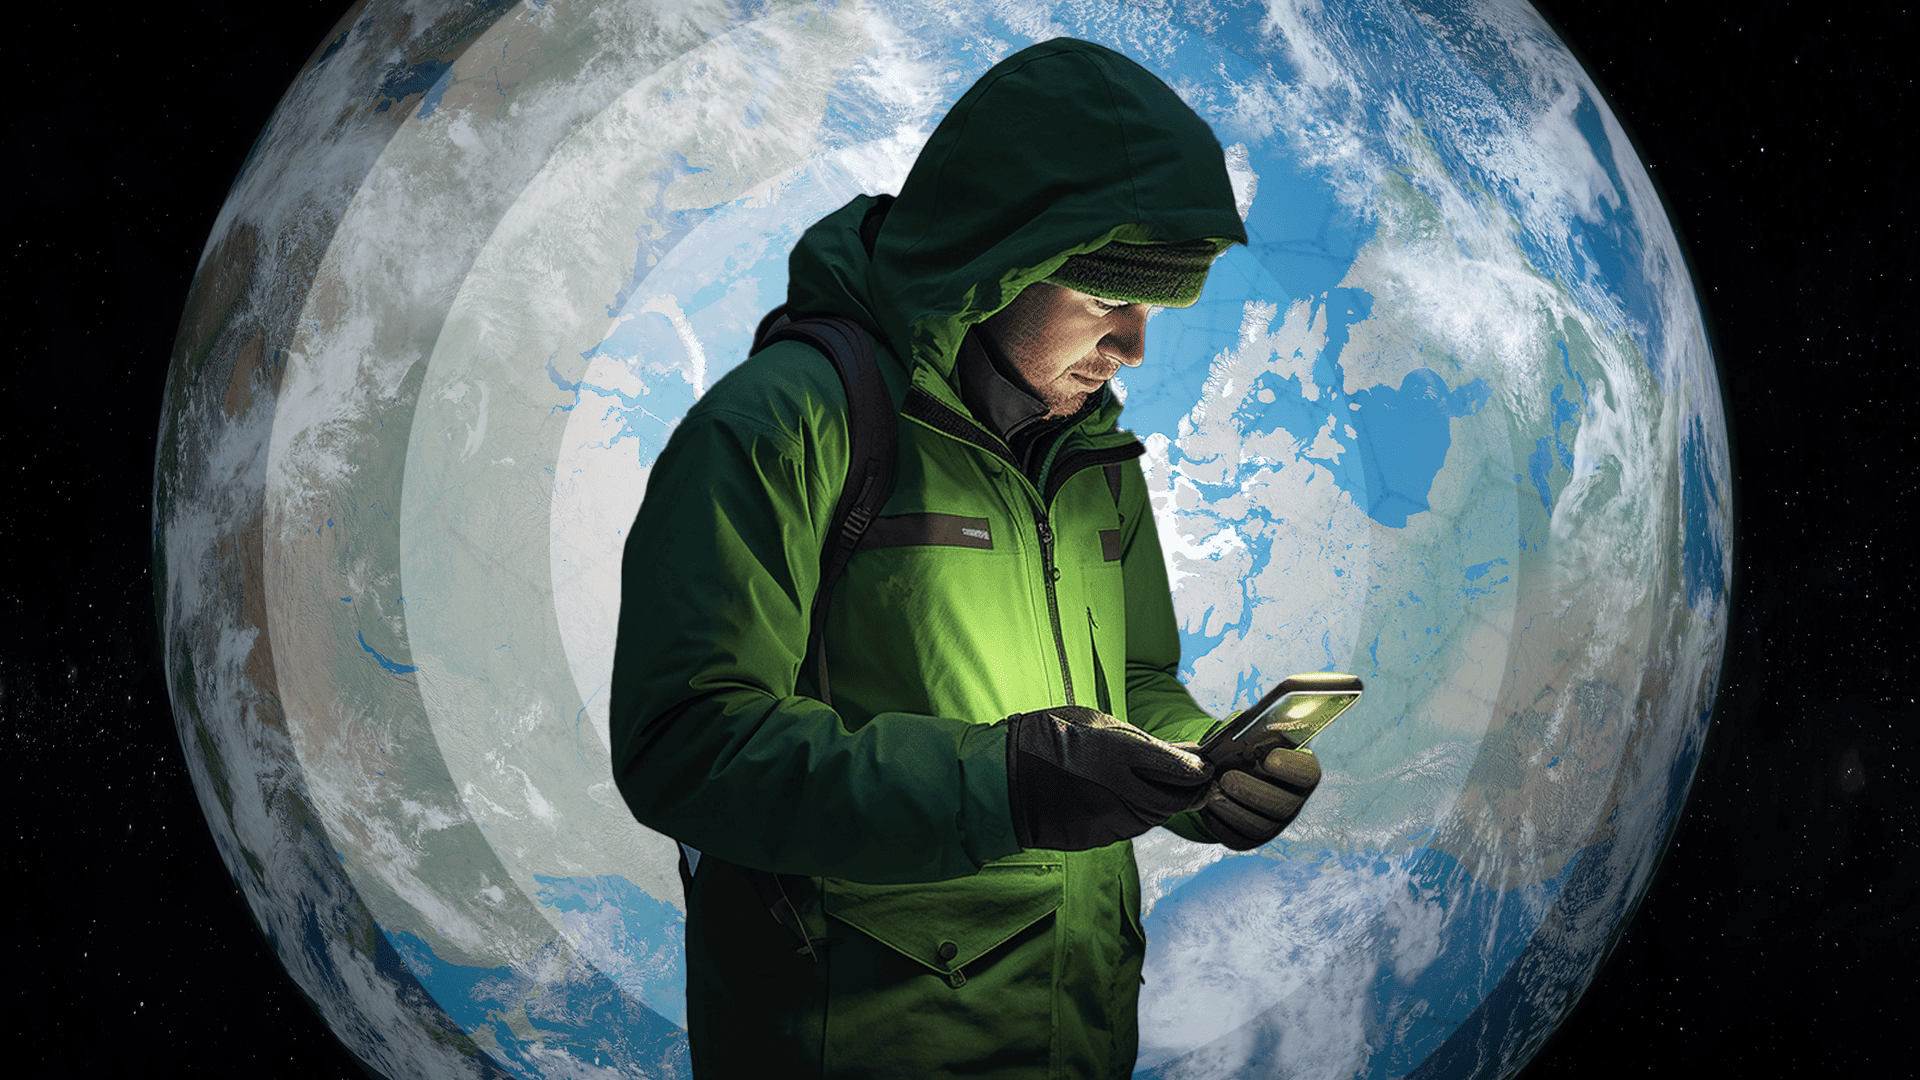 Arctic Frontiers: Image shows a man dressed in a green jacket looking at a phone that lights him up. The background shows a map of the Arctic region in a circular shape.